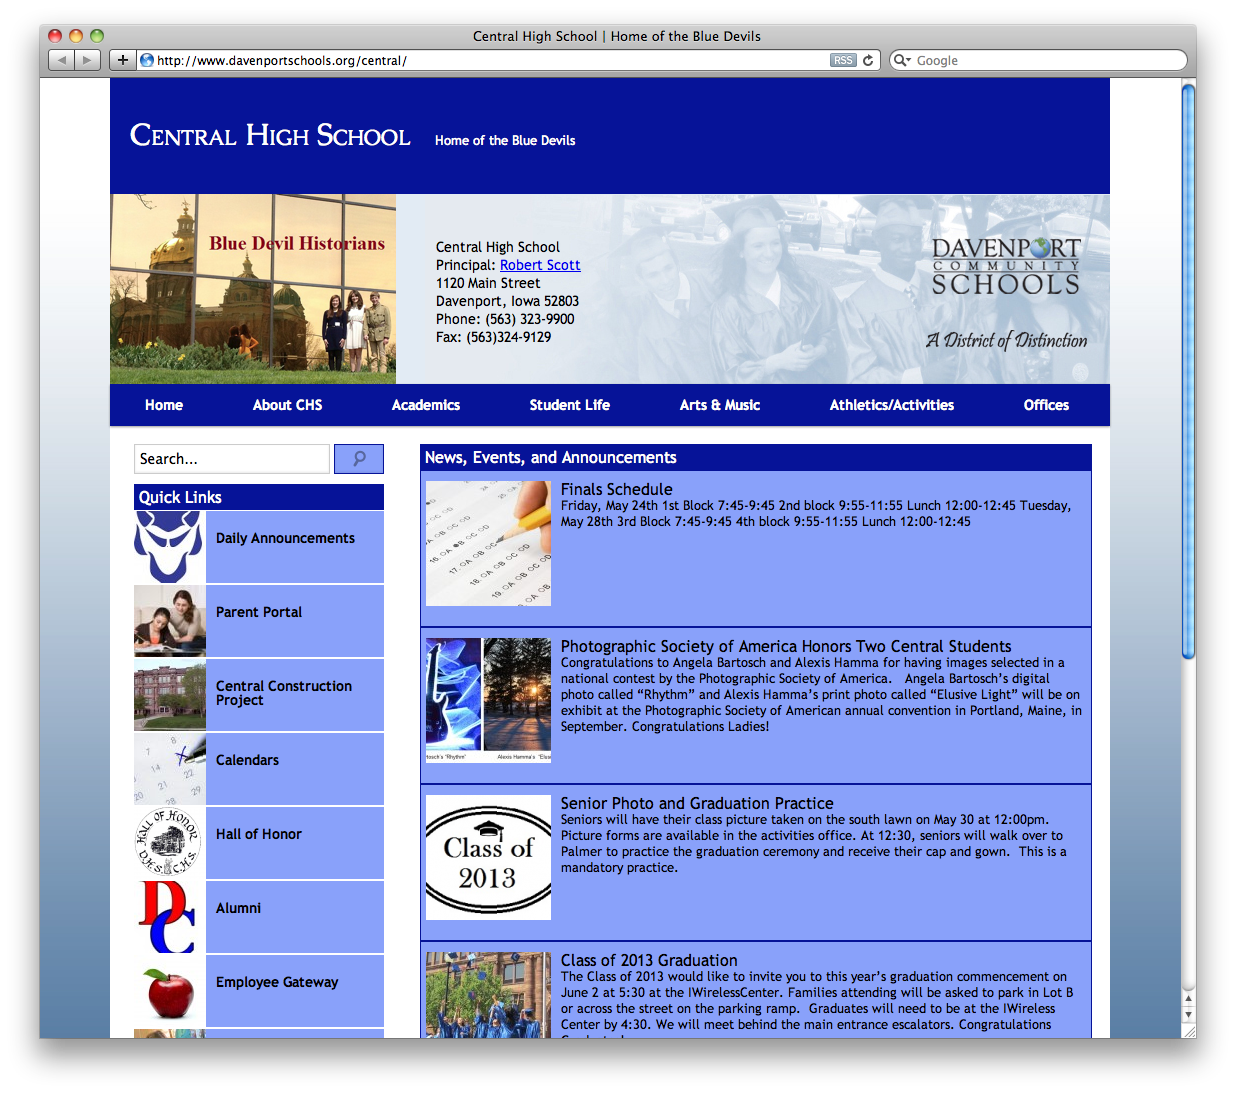 Davenport Central High School News Page